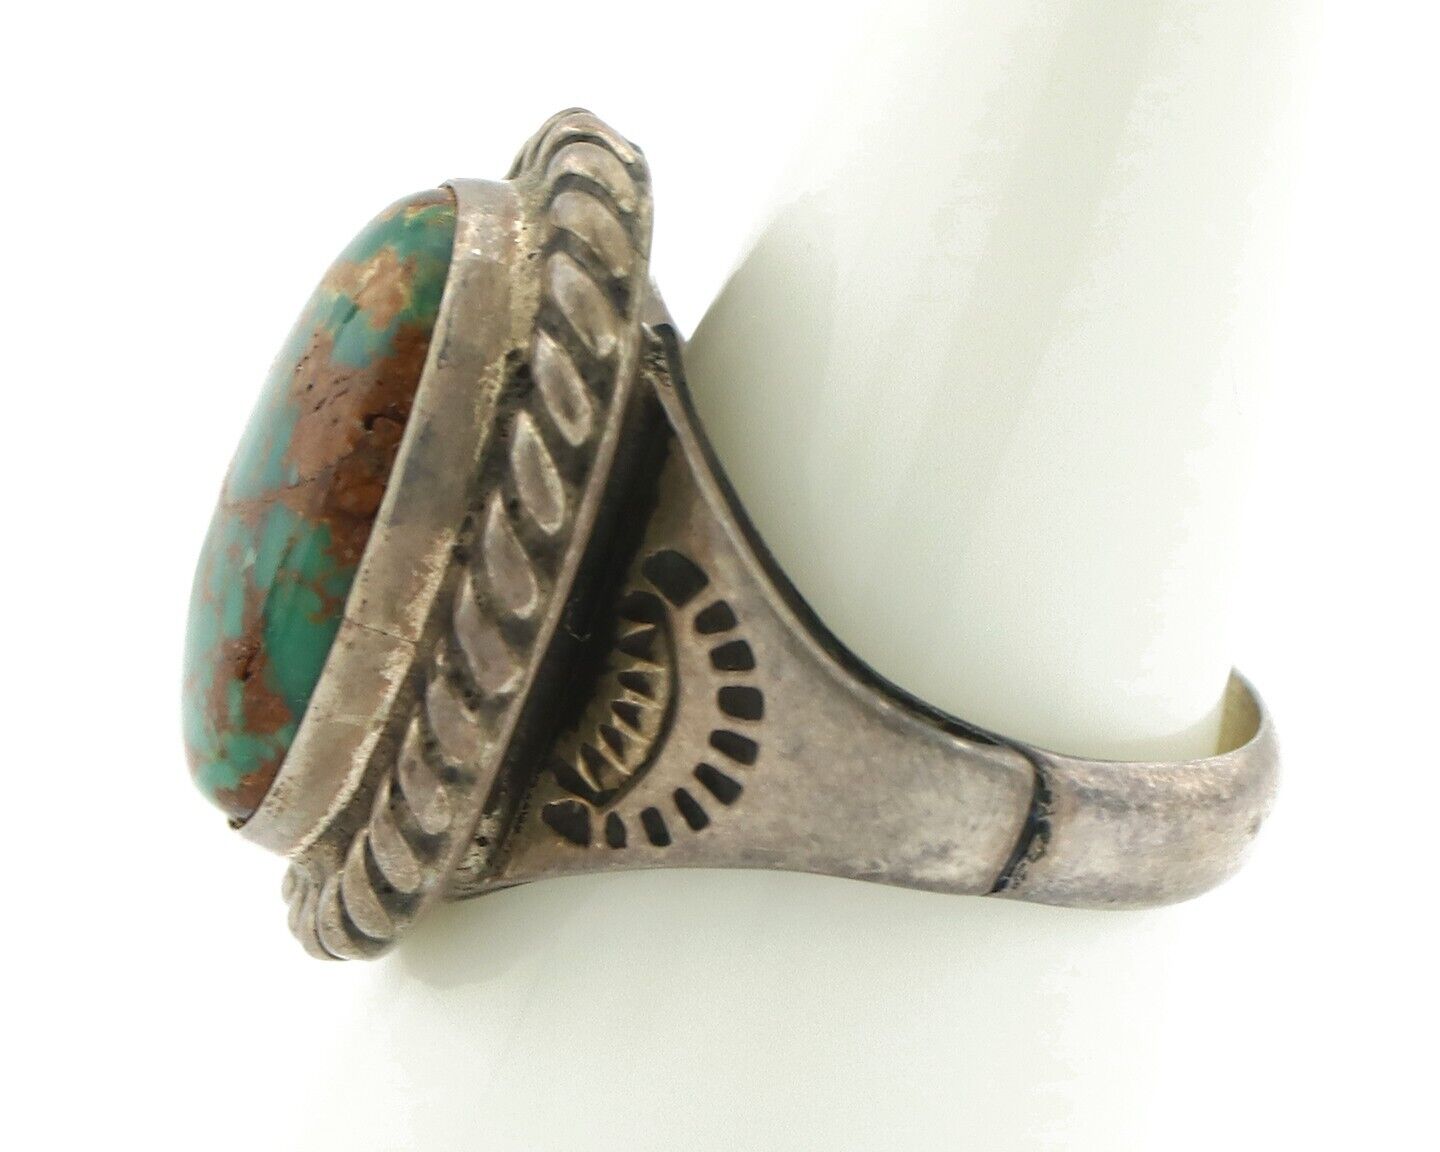 Navajo Ring 925 Silver Natural Turquoise Native American Signed C.80's